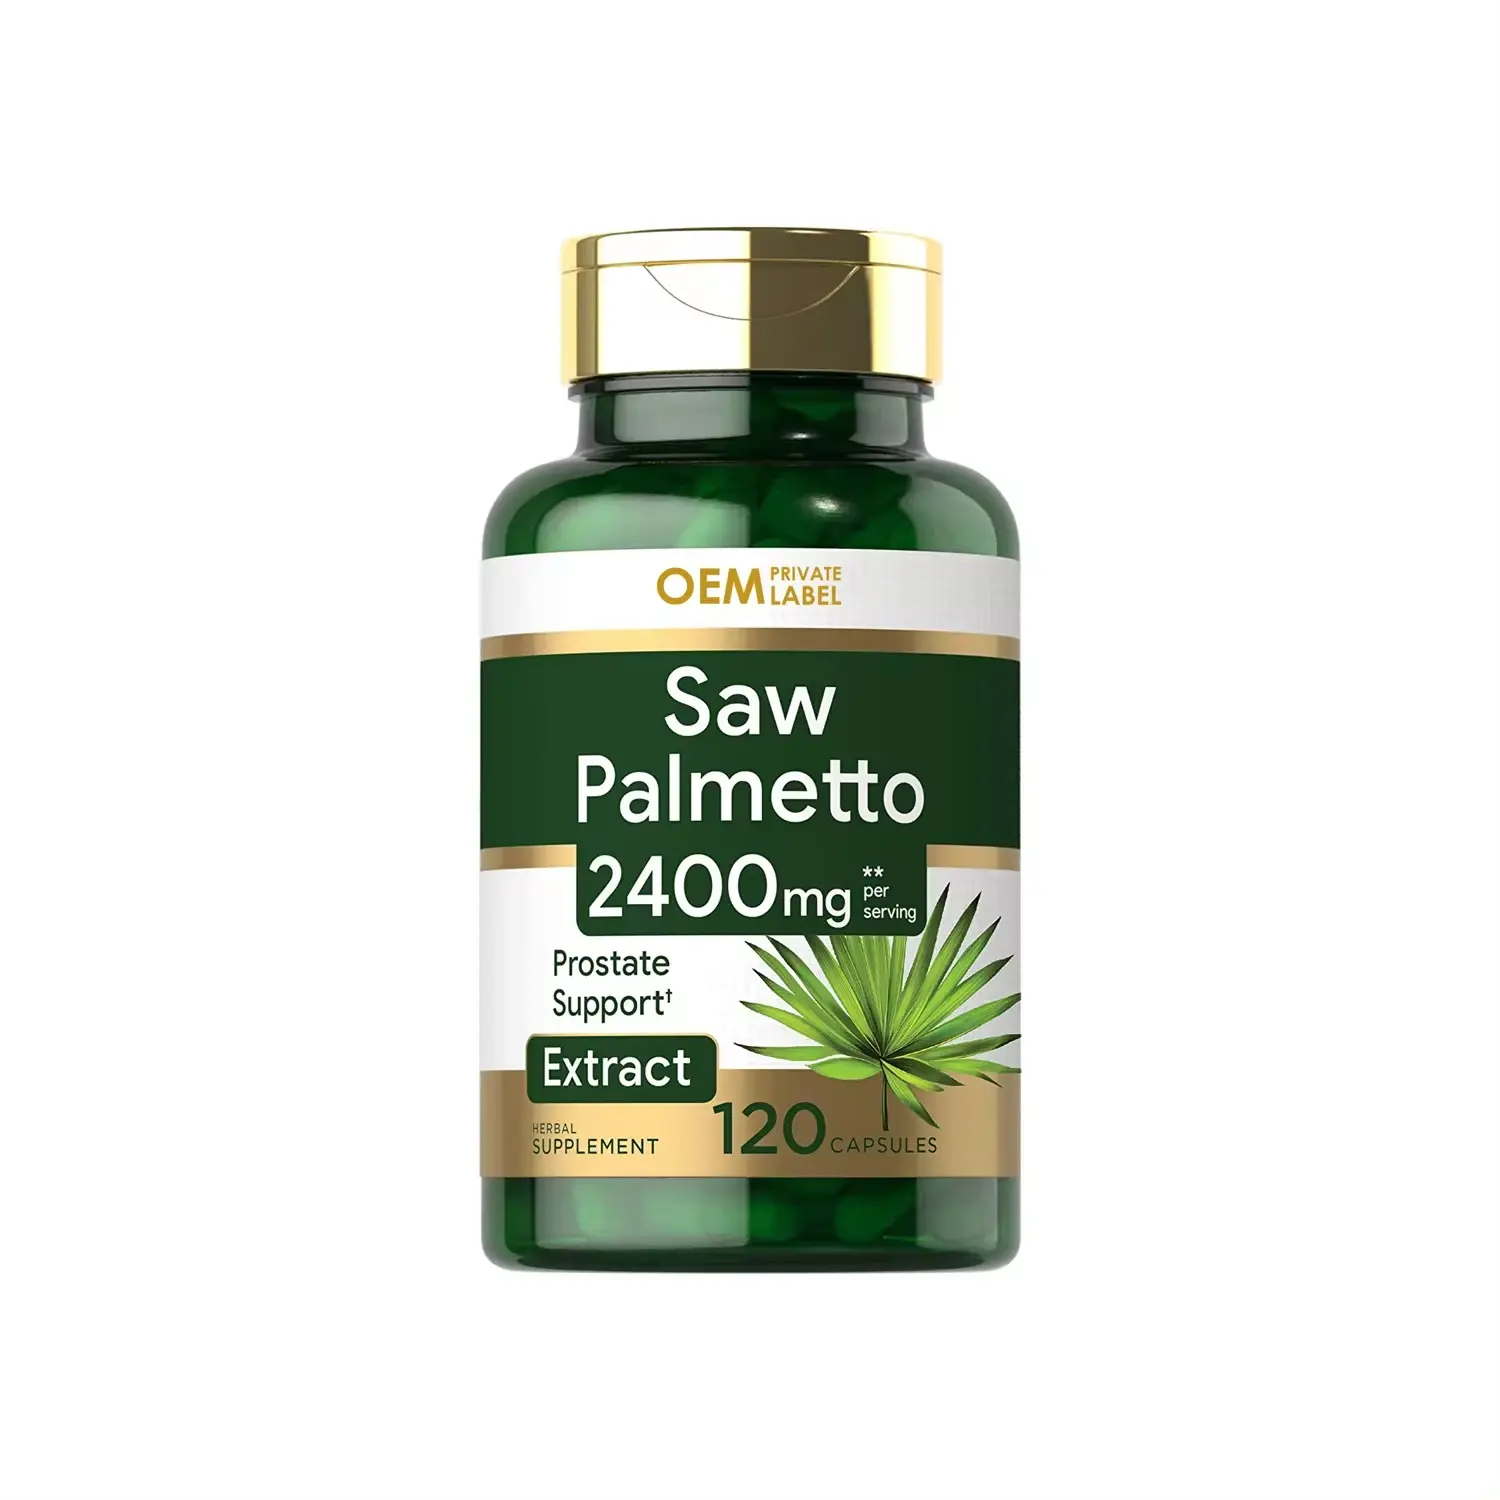 OEM Saw Palmetto Capsules for women Hair Growth Saw Palmetto supplement blended organic saw palmetto extract